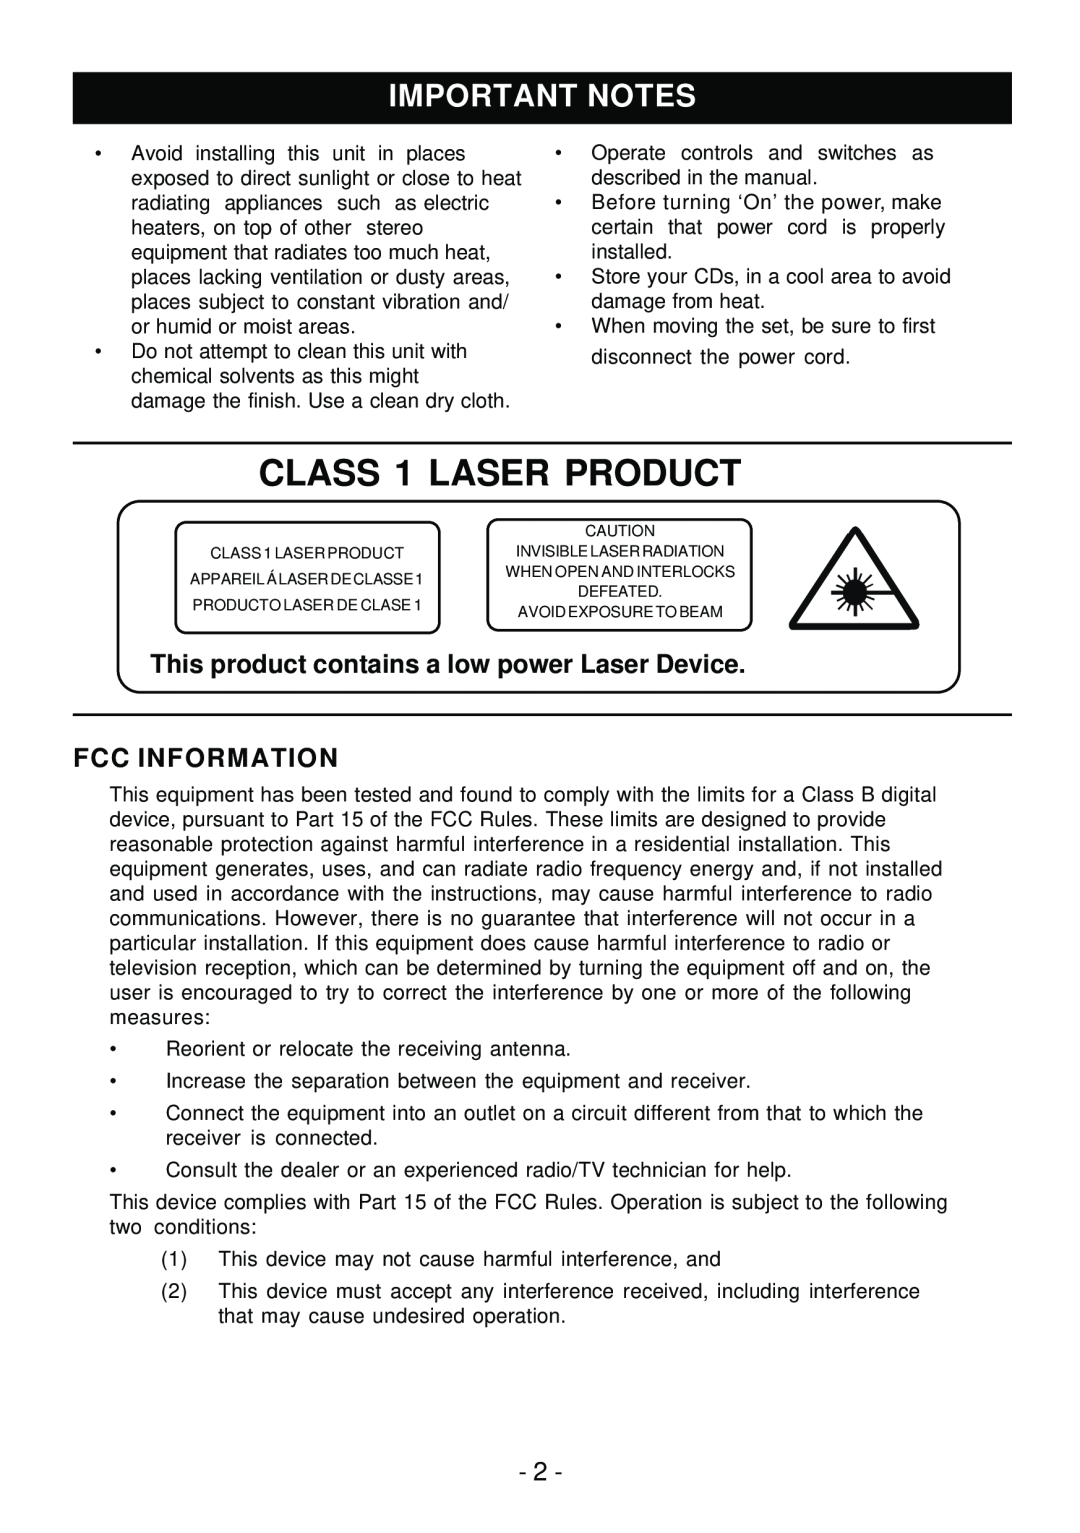 Sylvania SRCD858 Important Notes, This product contains a low power Laser Device, Fcc Information, CLASS 1 LASER PRODUCT 